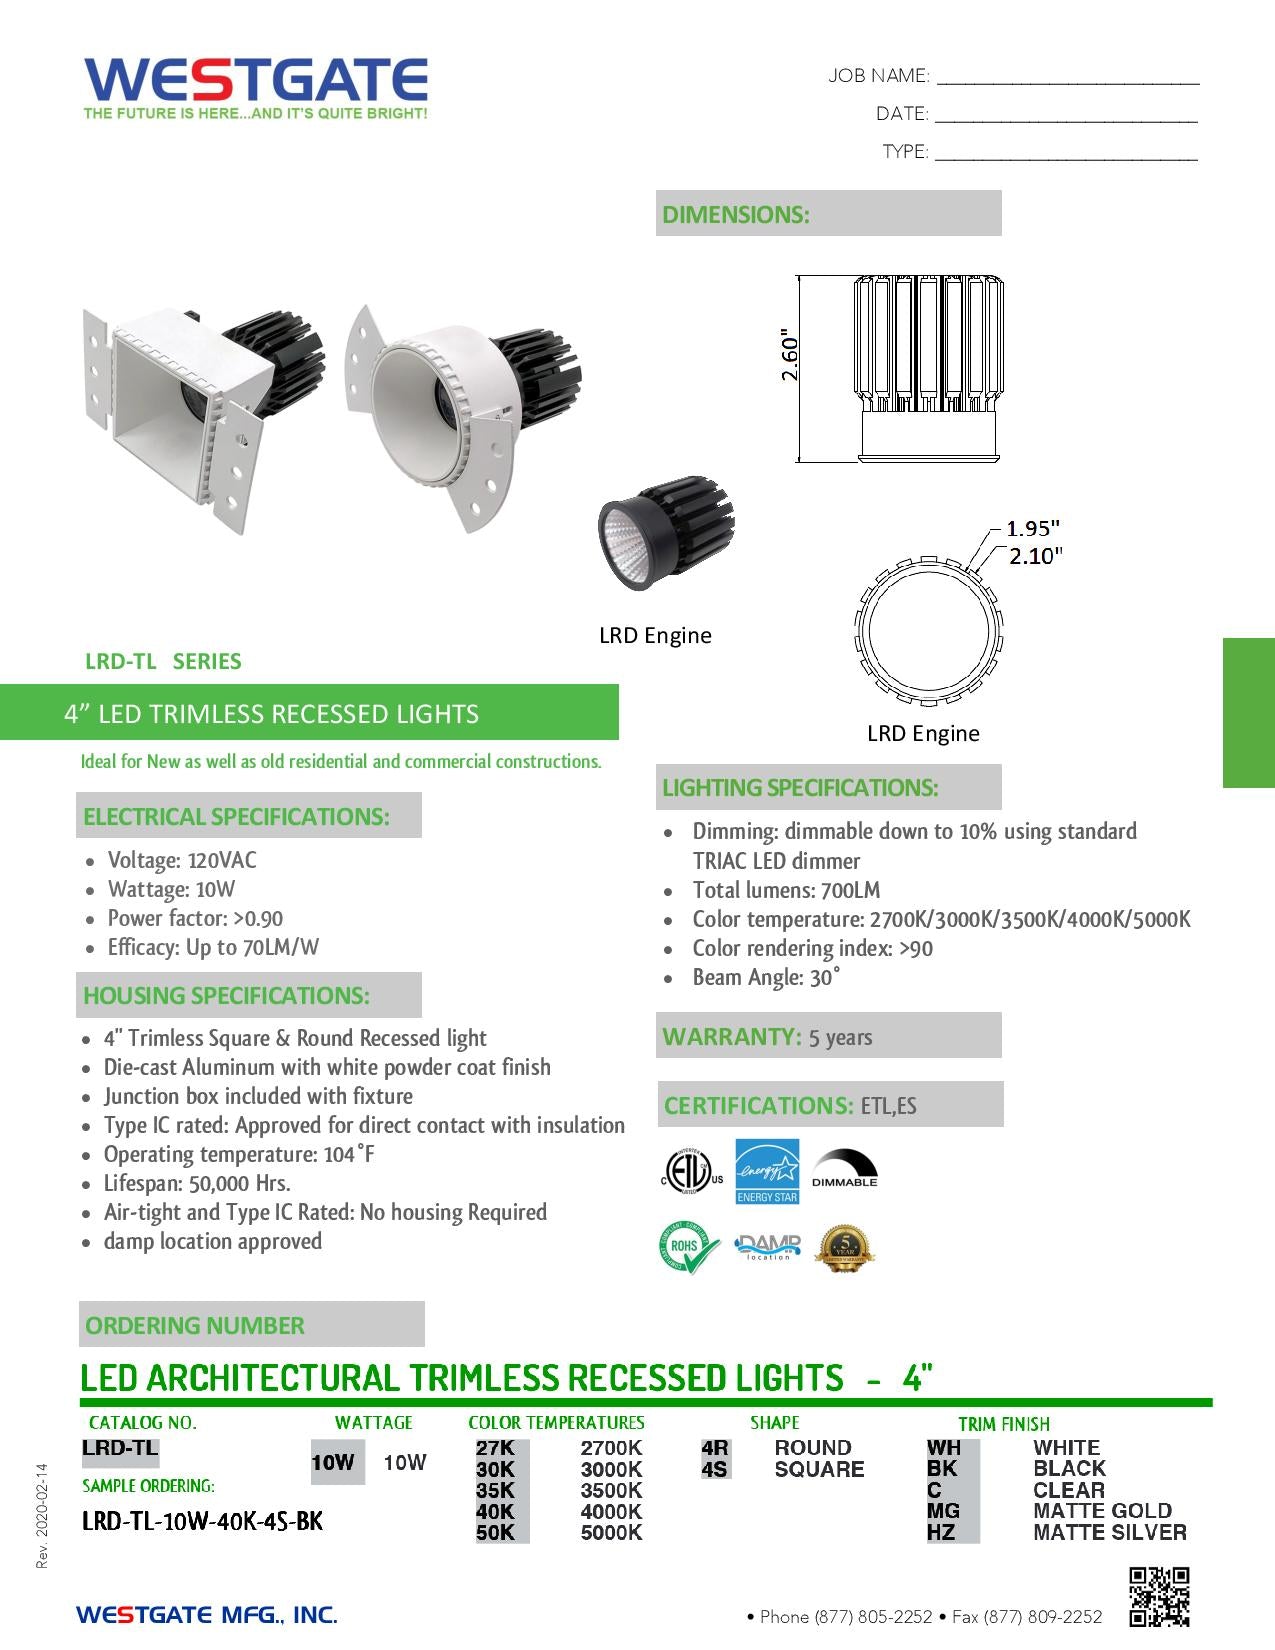 LED 4" Square Architectural Trimless Recessed Lights